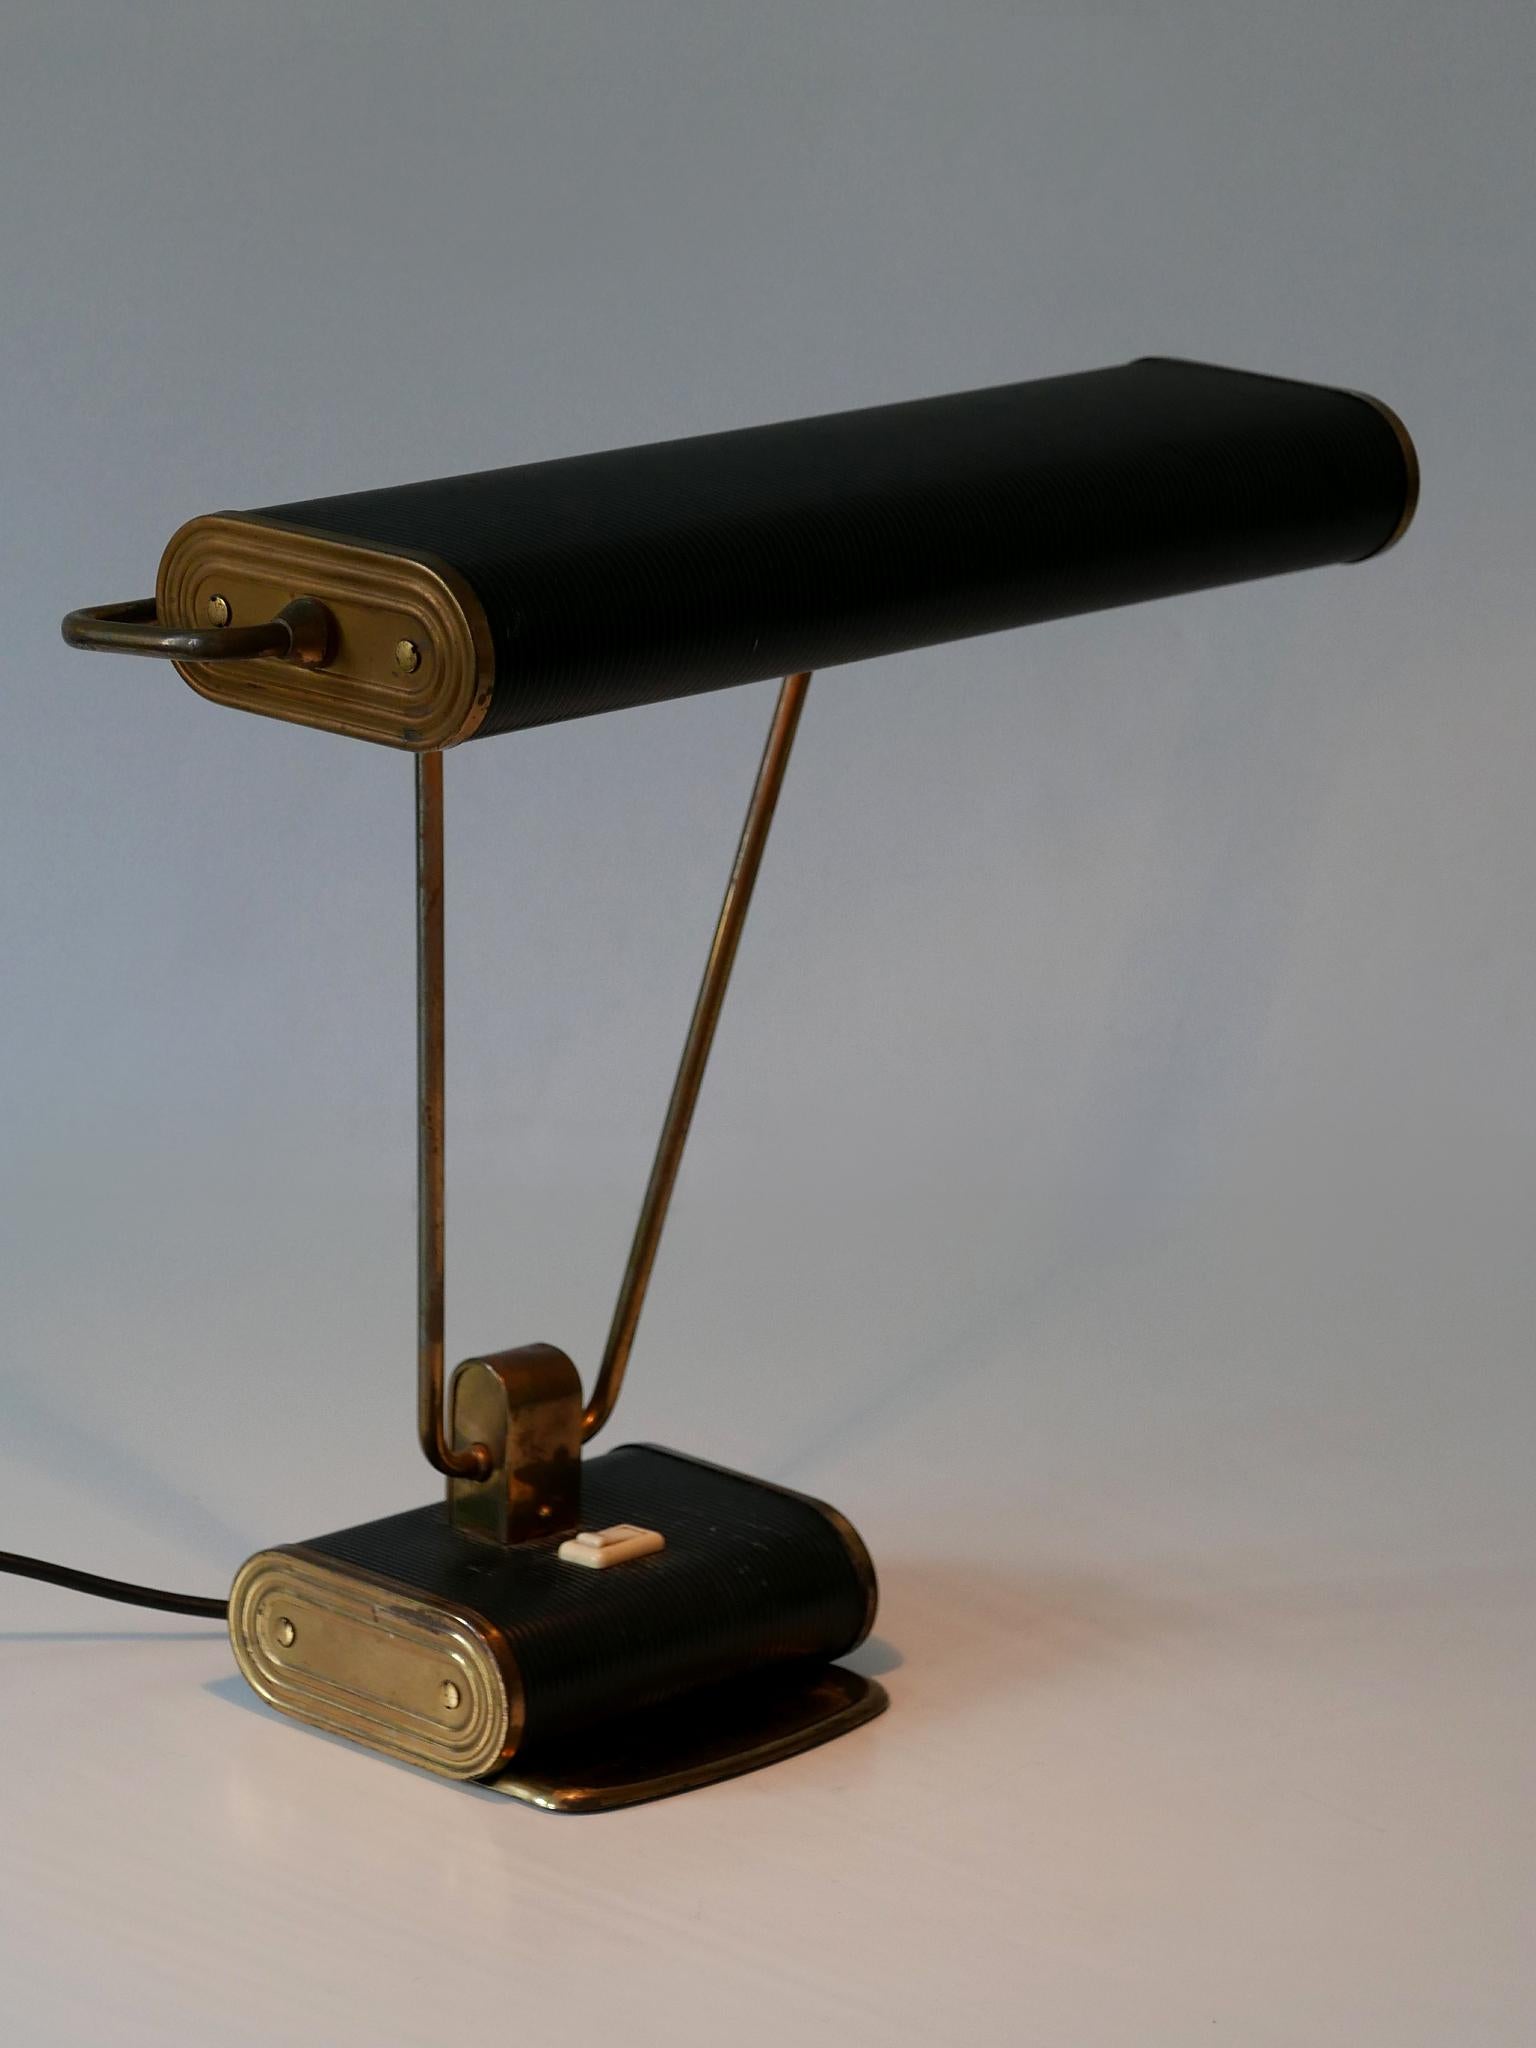 Metal Art Deco Table Lamp or Desk Light 'No 71' by André Mounique for Jumo 1930s For Sale